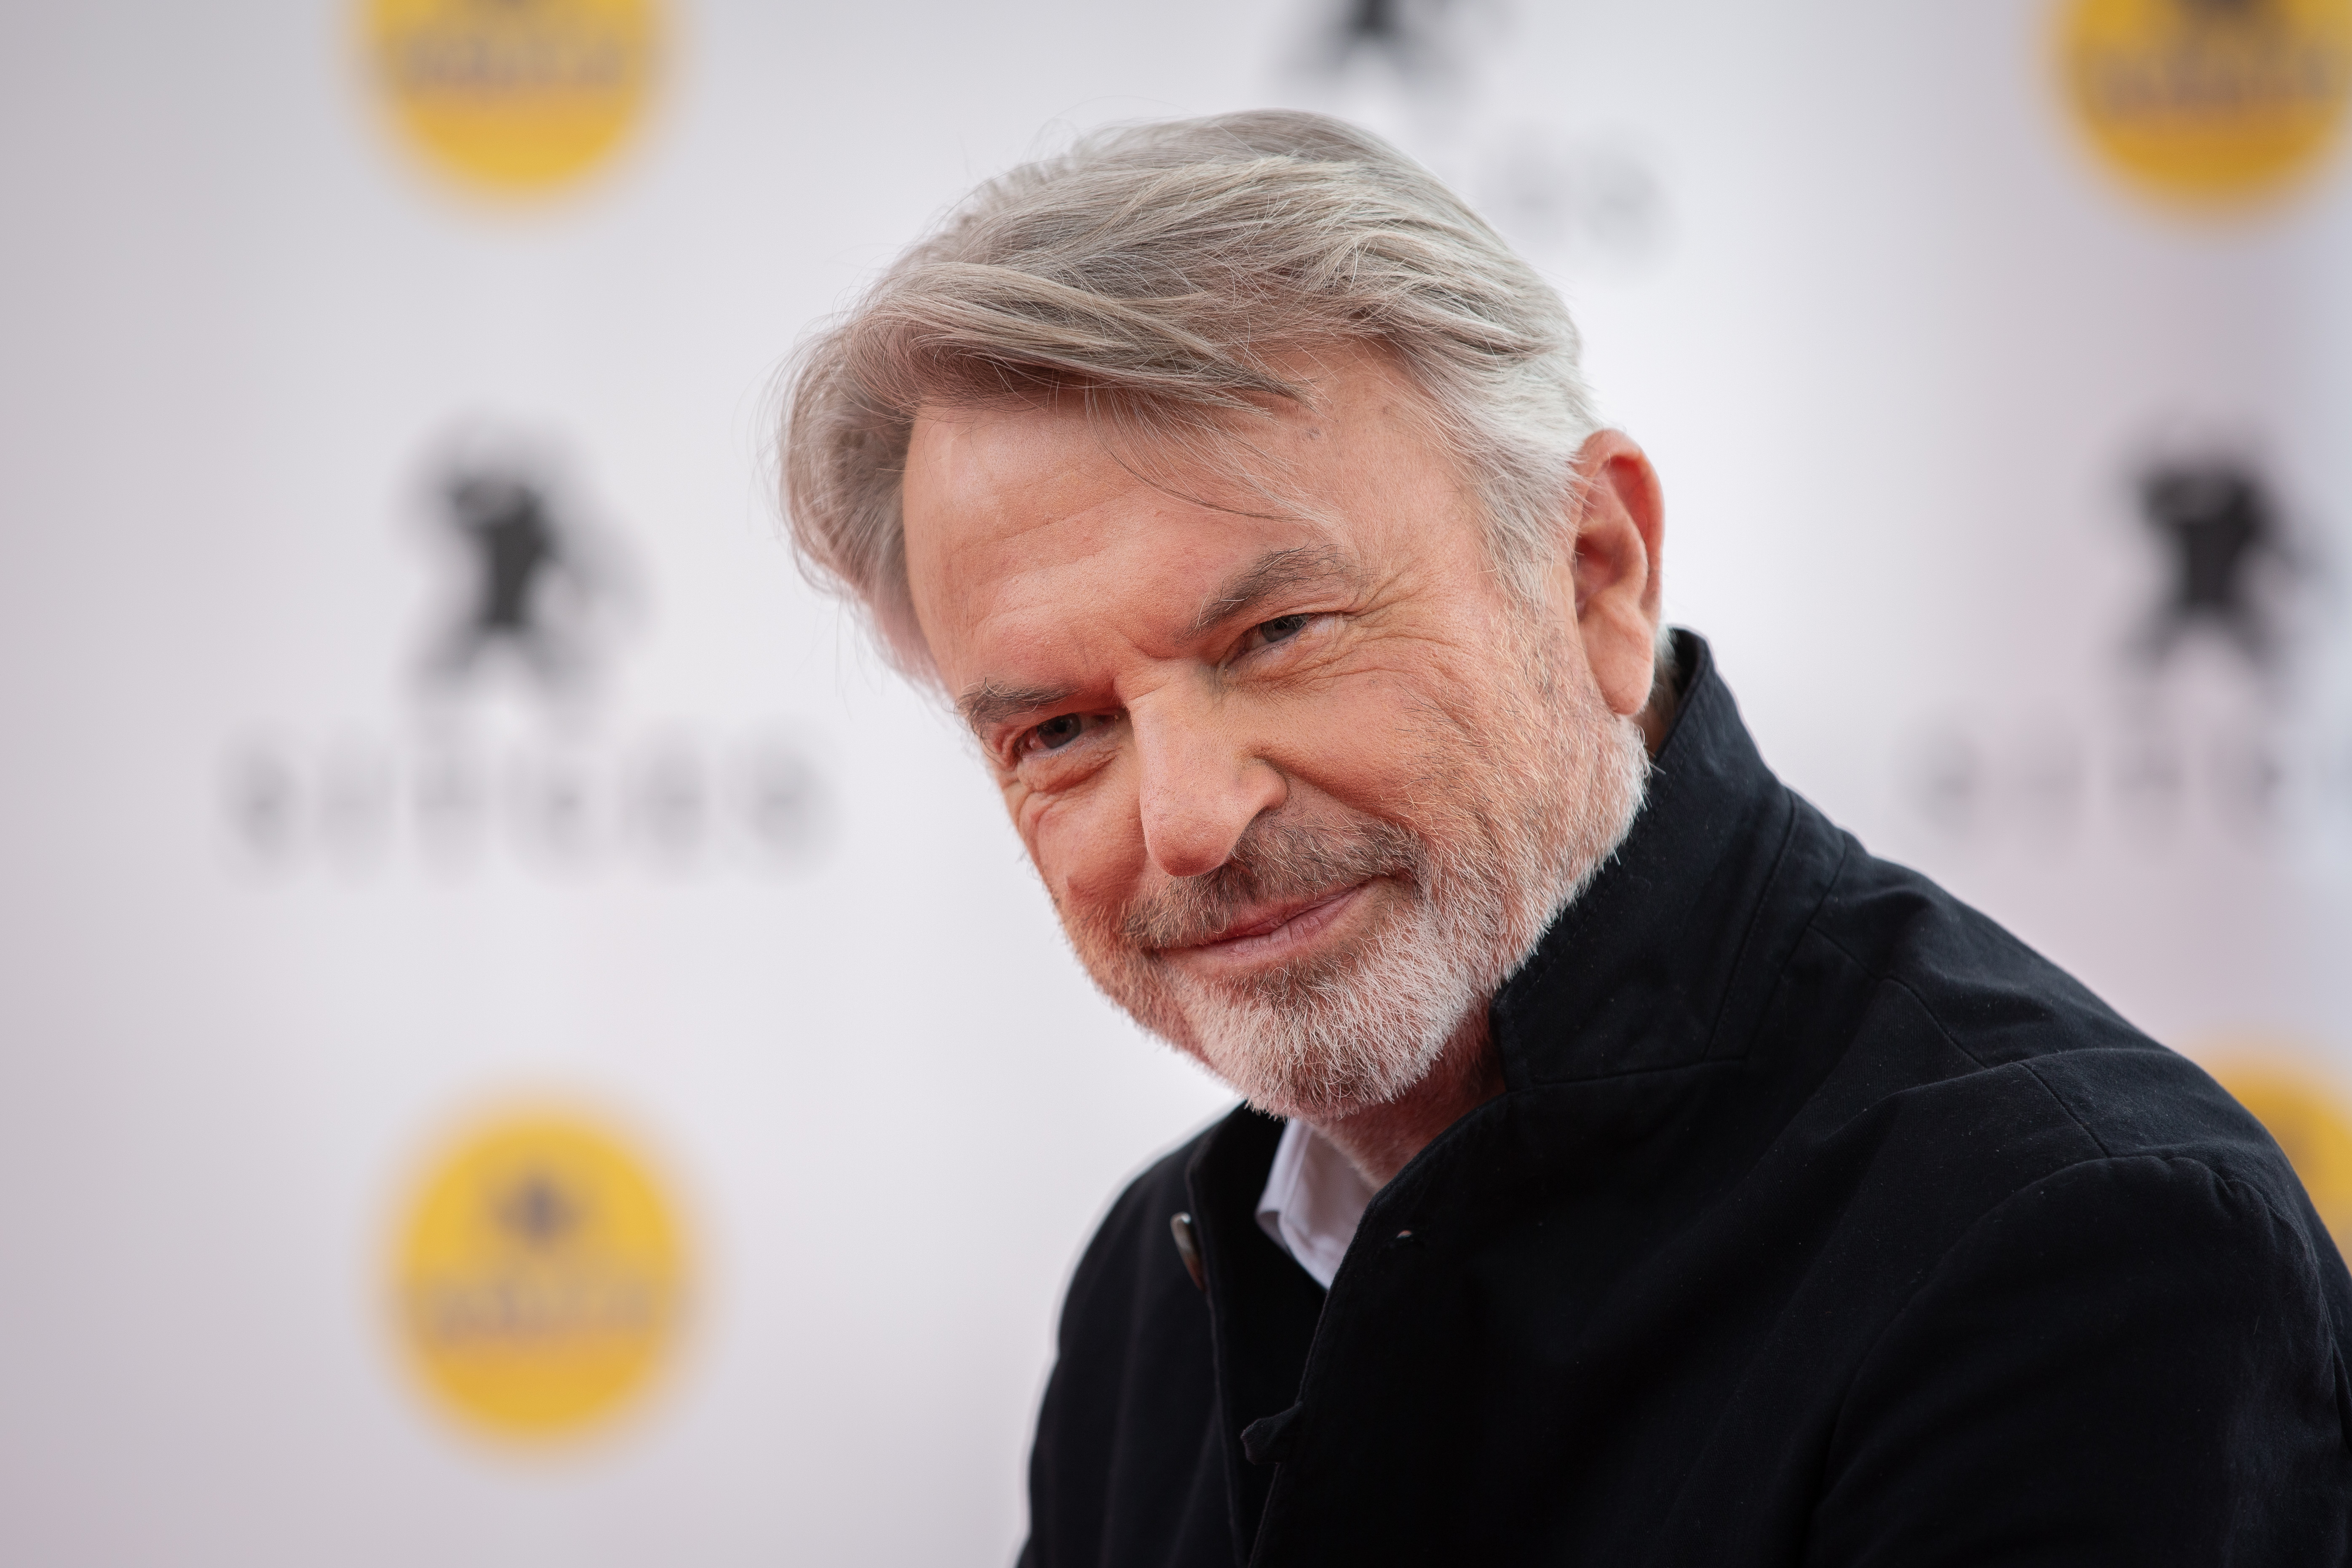 Actor Sam Neill gives a press conference during the ninth day of the 52 Fantastic Film Festival Edition on October 11, 2019 in Sitges, Spain | Source: Getty Images